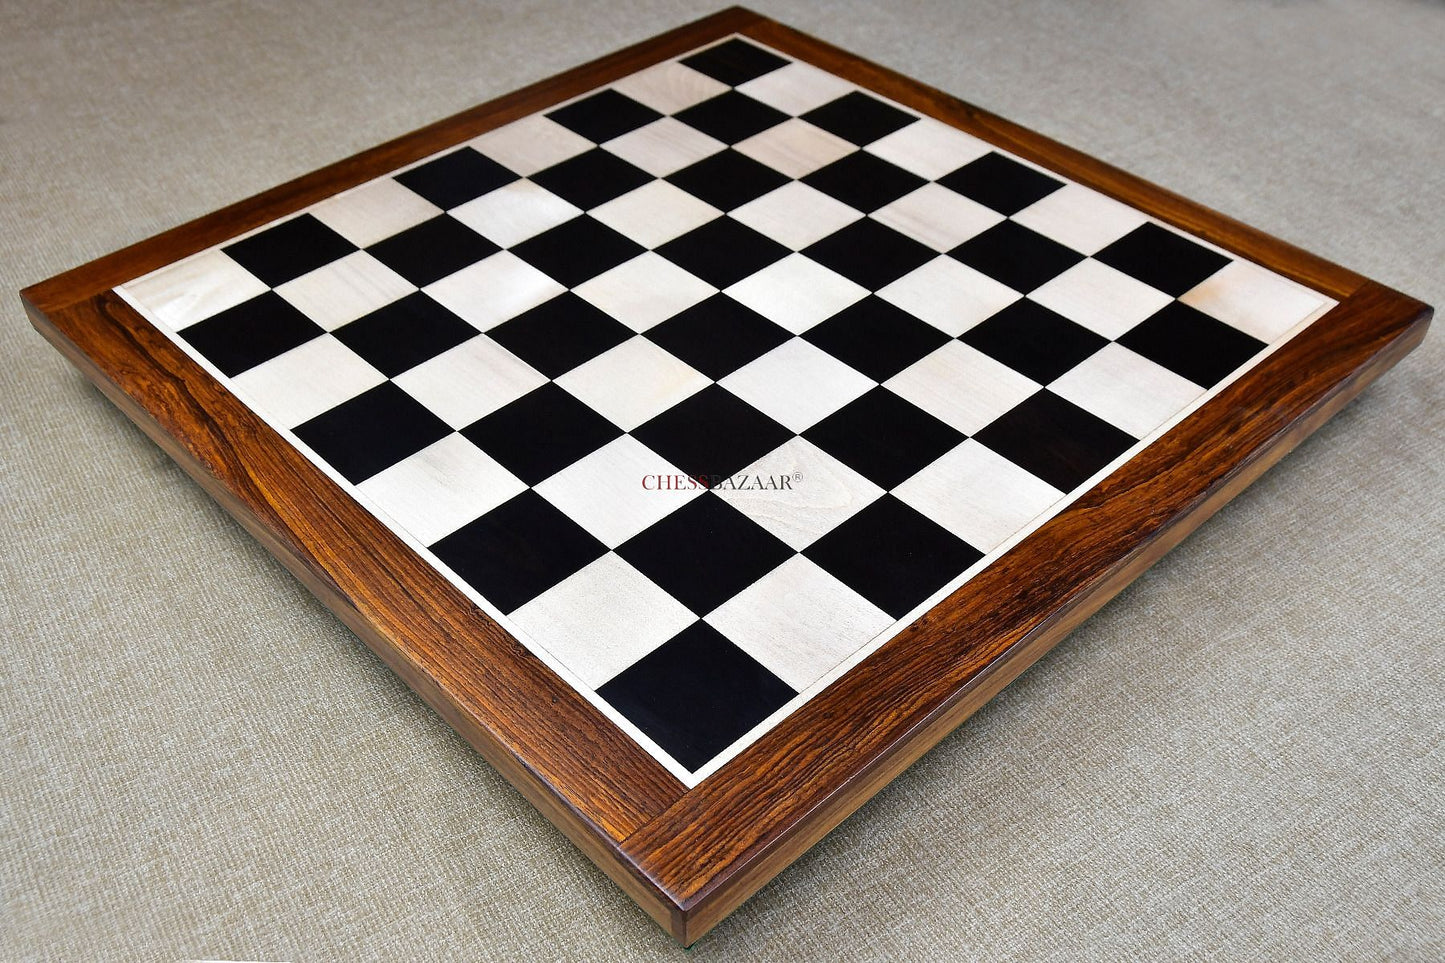 Solid Wooden Indian Chess Board in Genuine Ebony Wood & Maple Wood with Sheesham Wood Border 21" - 55 mm Square